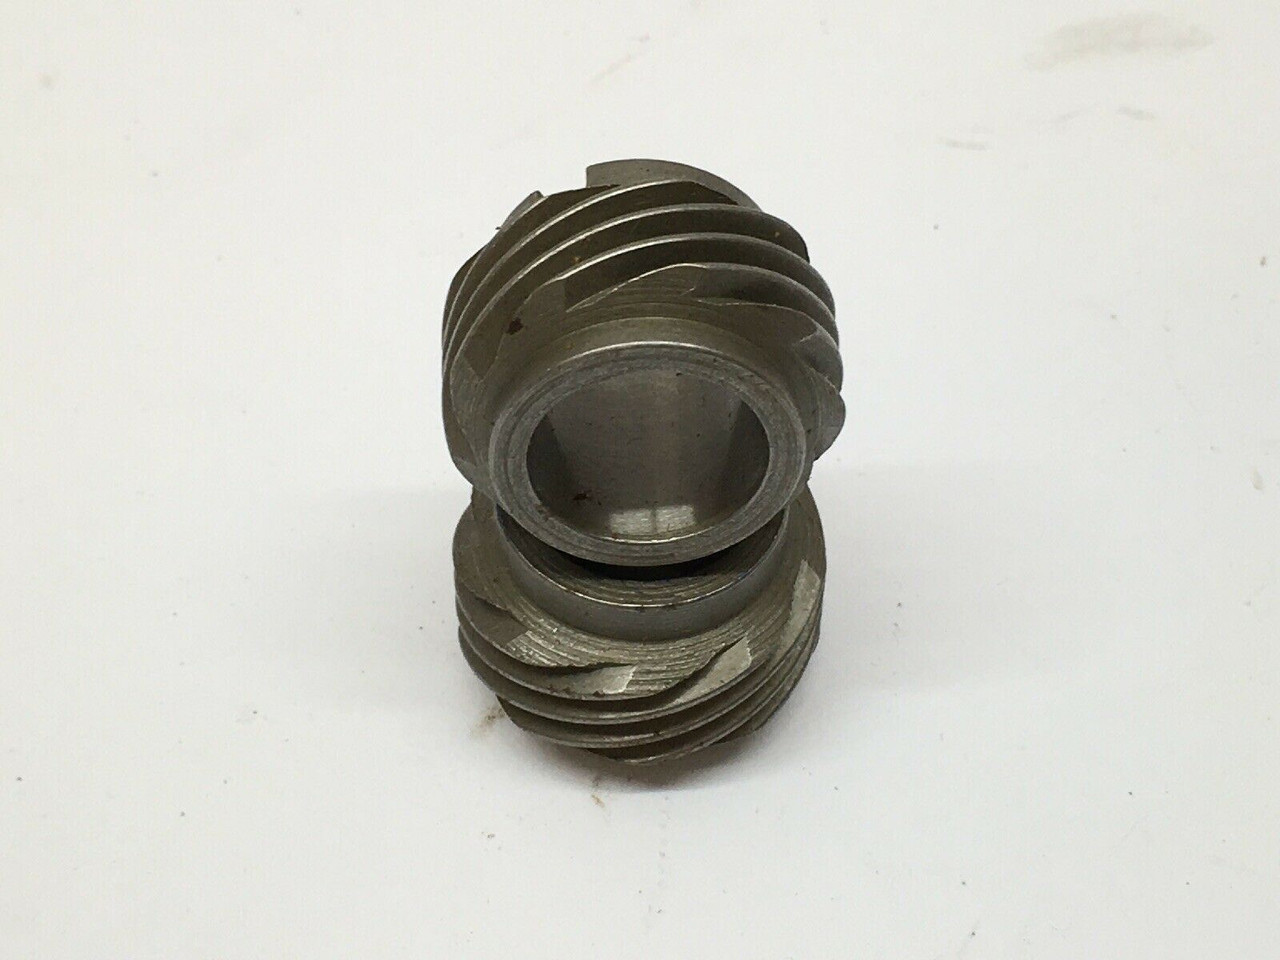 Helical Gear 12602 Cummins Protruding Hubs Lot of 2 